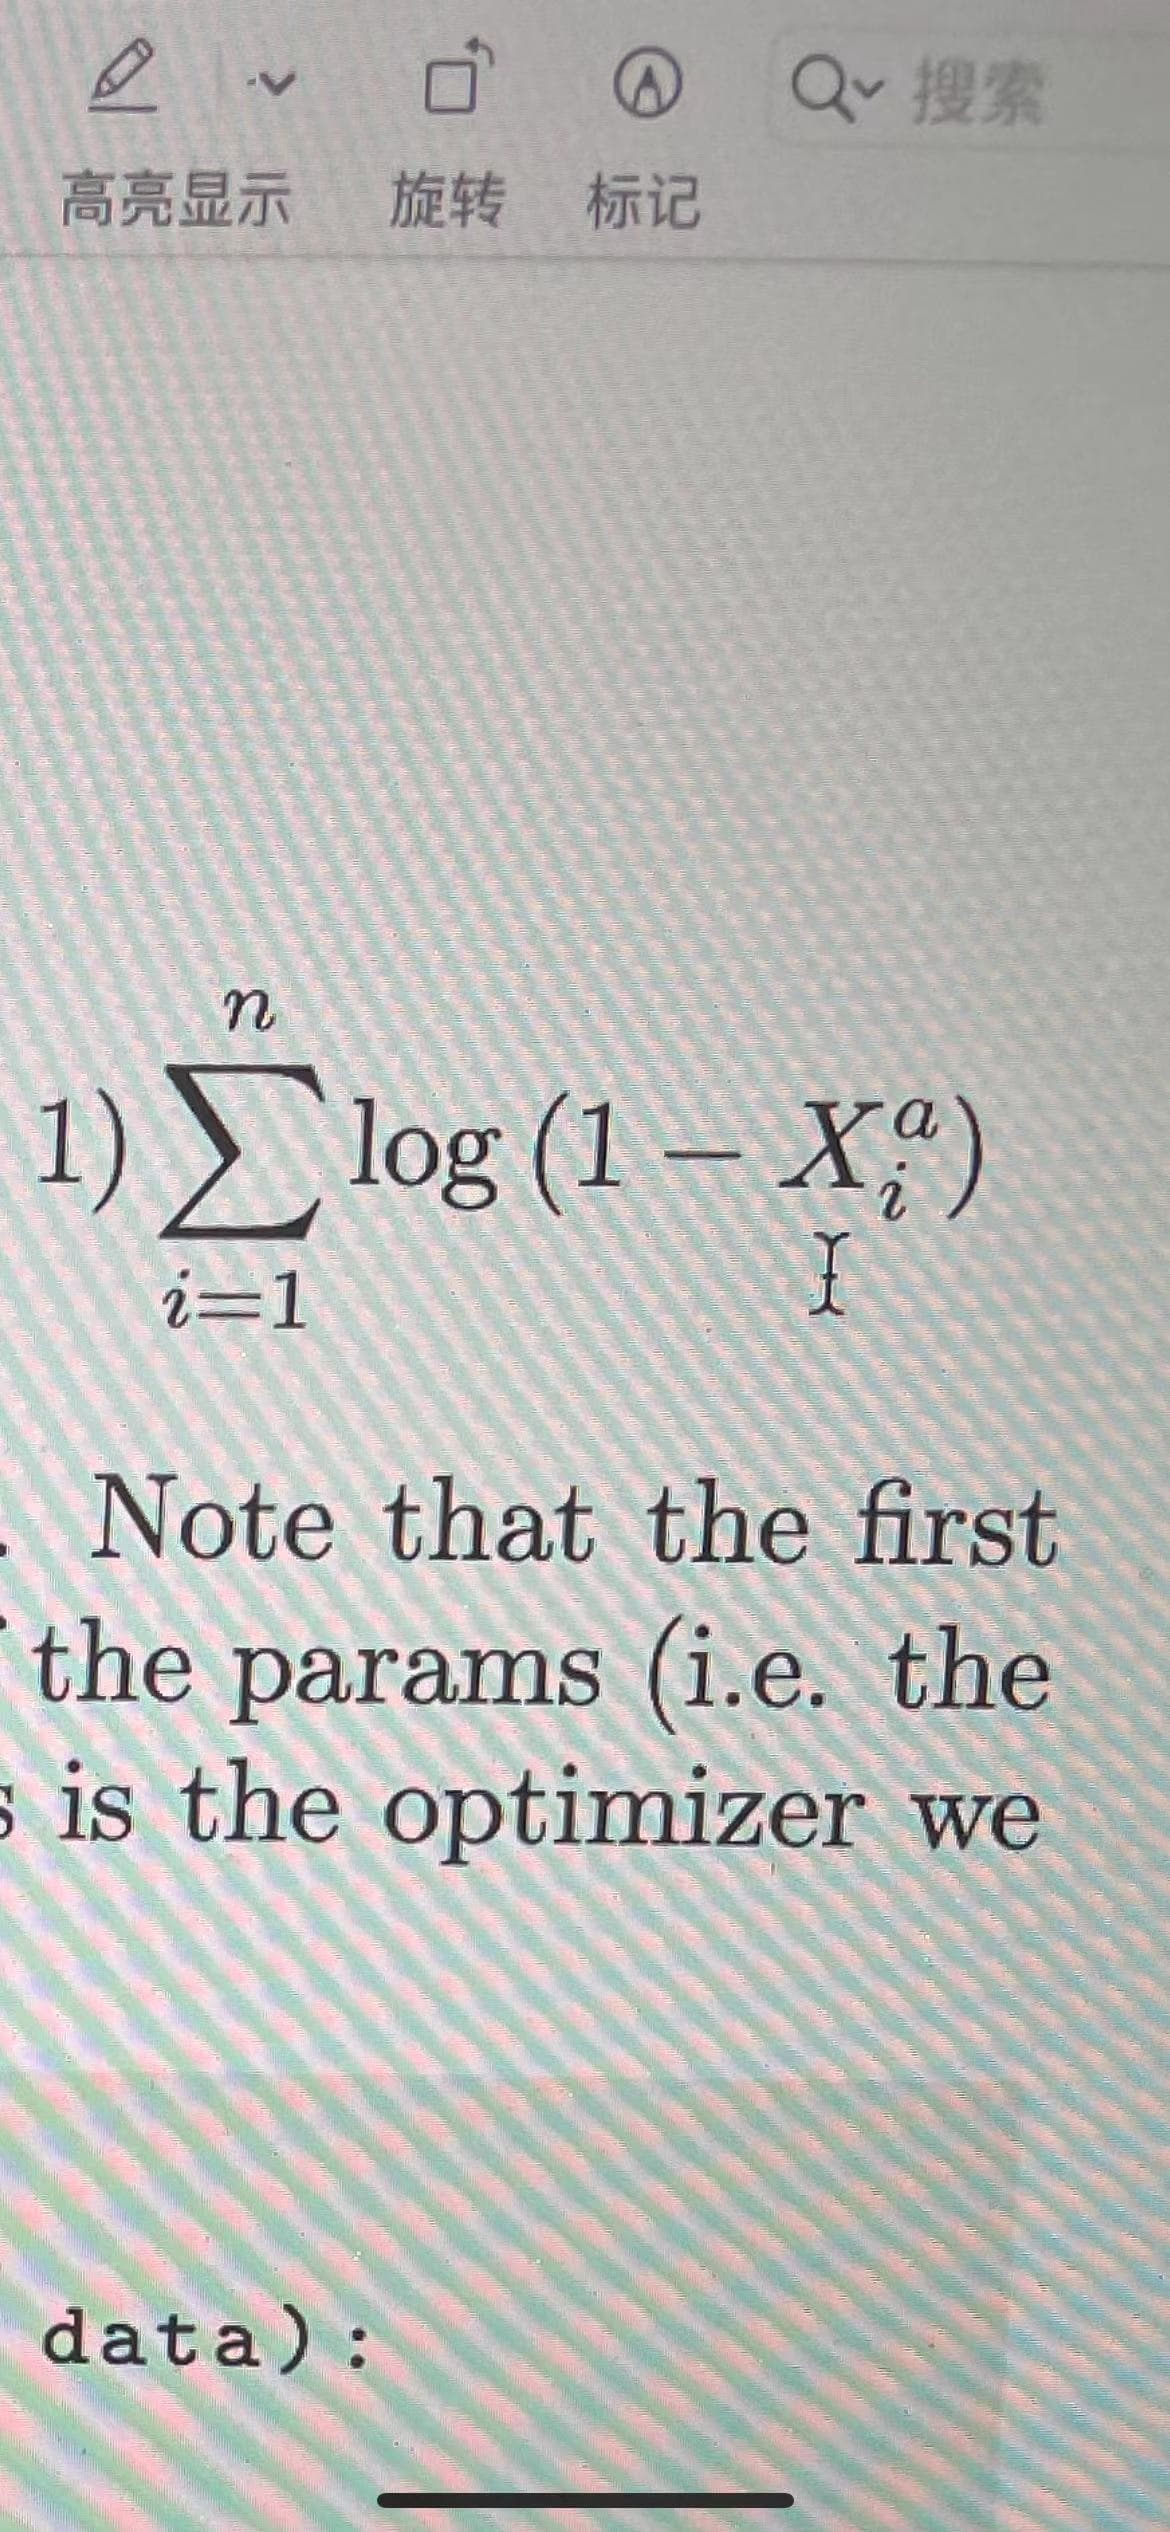 @ Qv
高亮显示 旋转标记
1) log (1 – X)
i=1
Note that the first
the params (i.e. the
s is the optimizer we
data):
